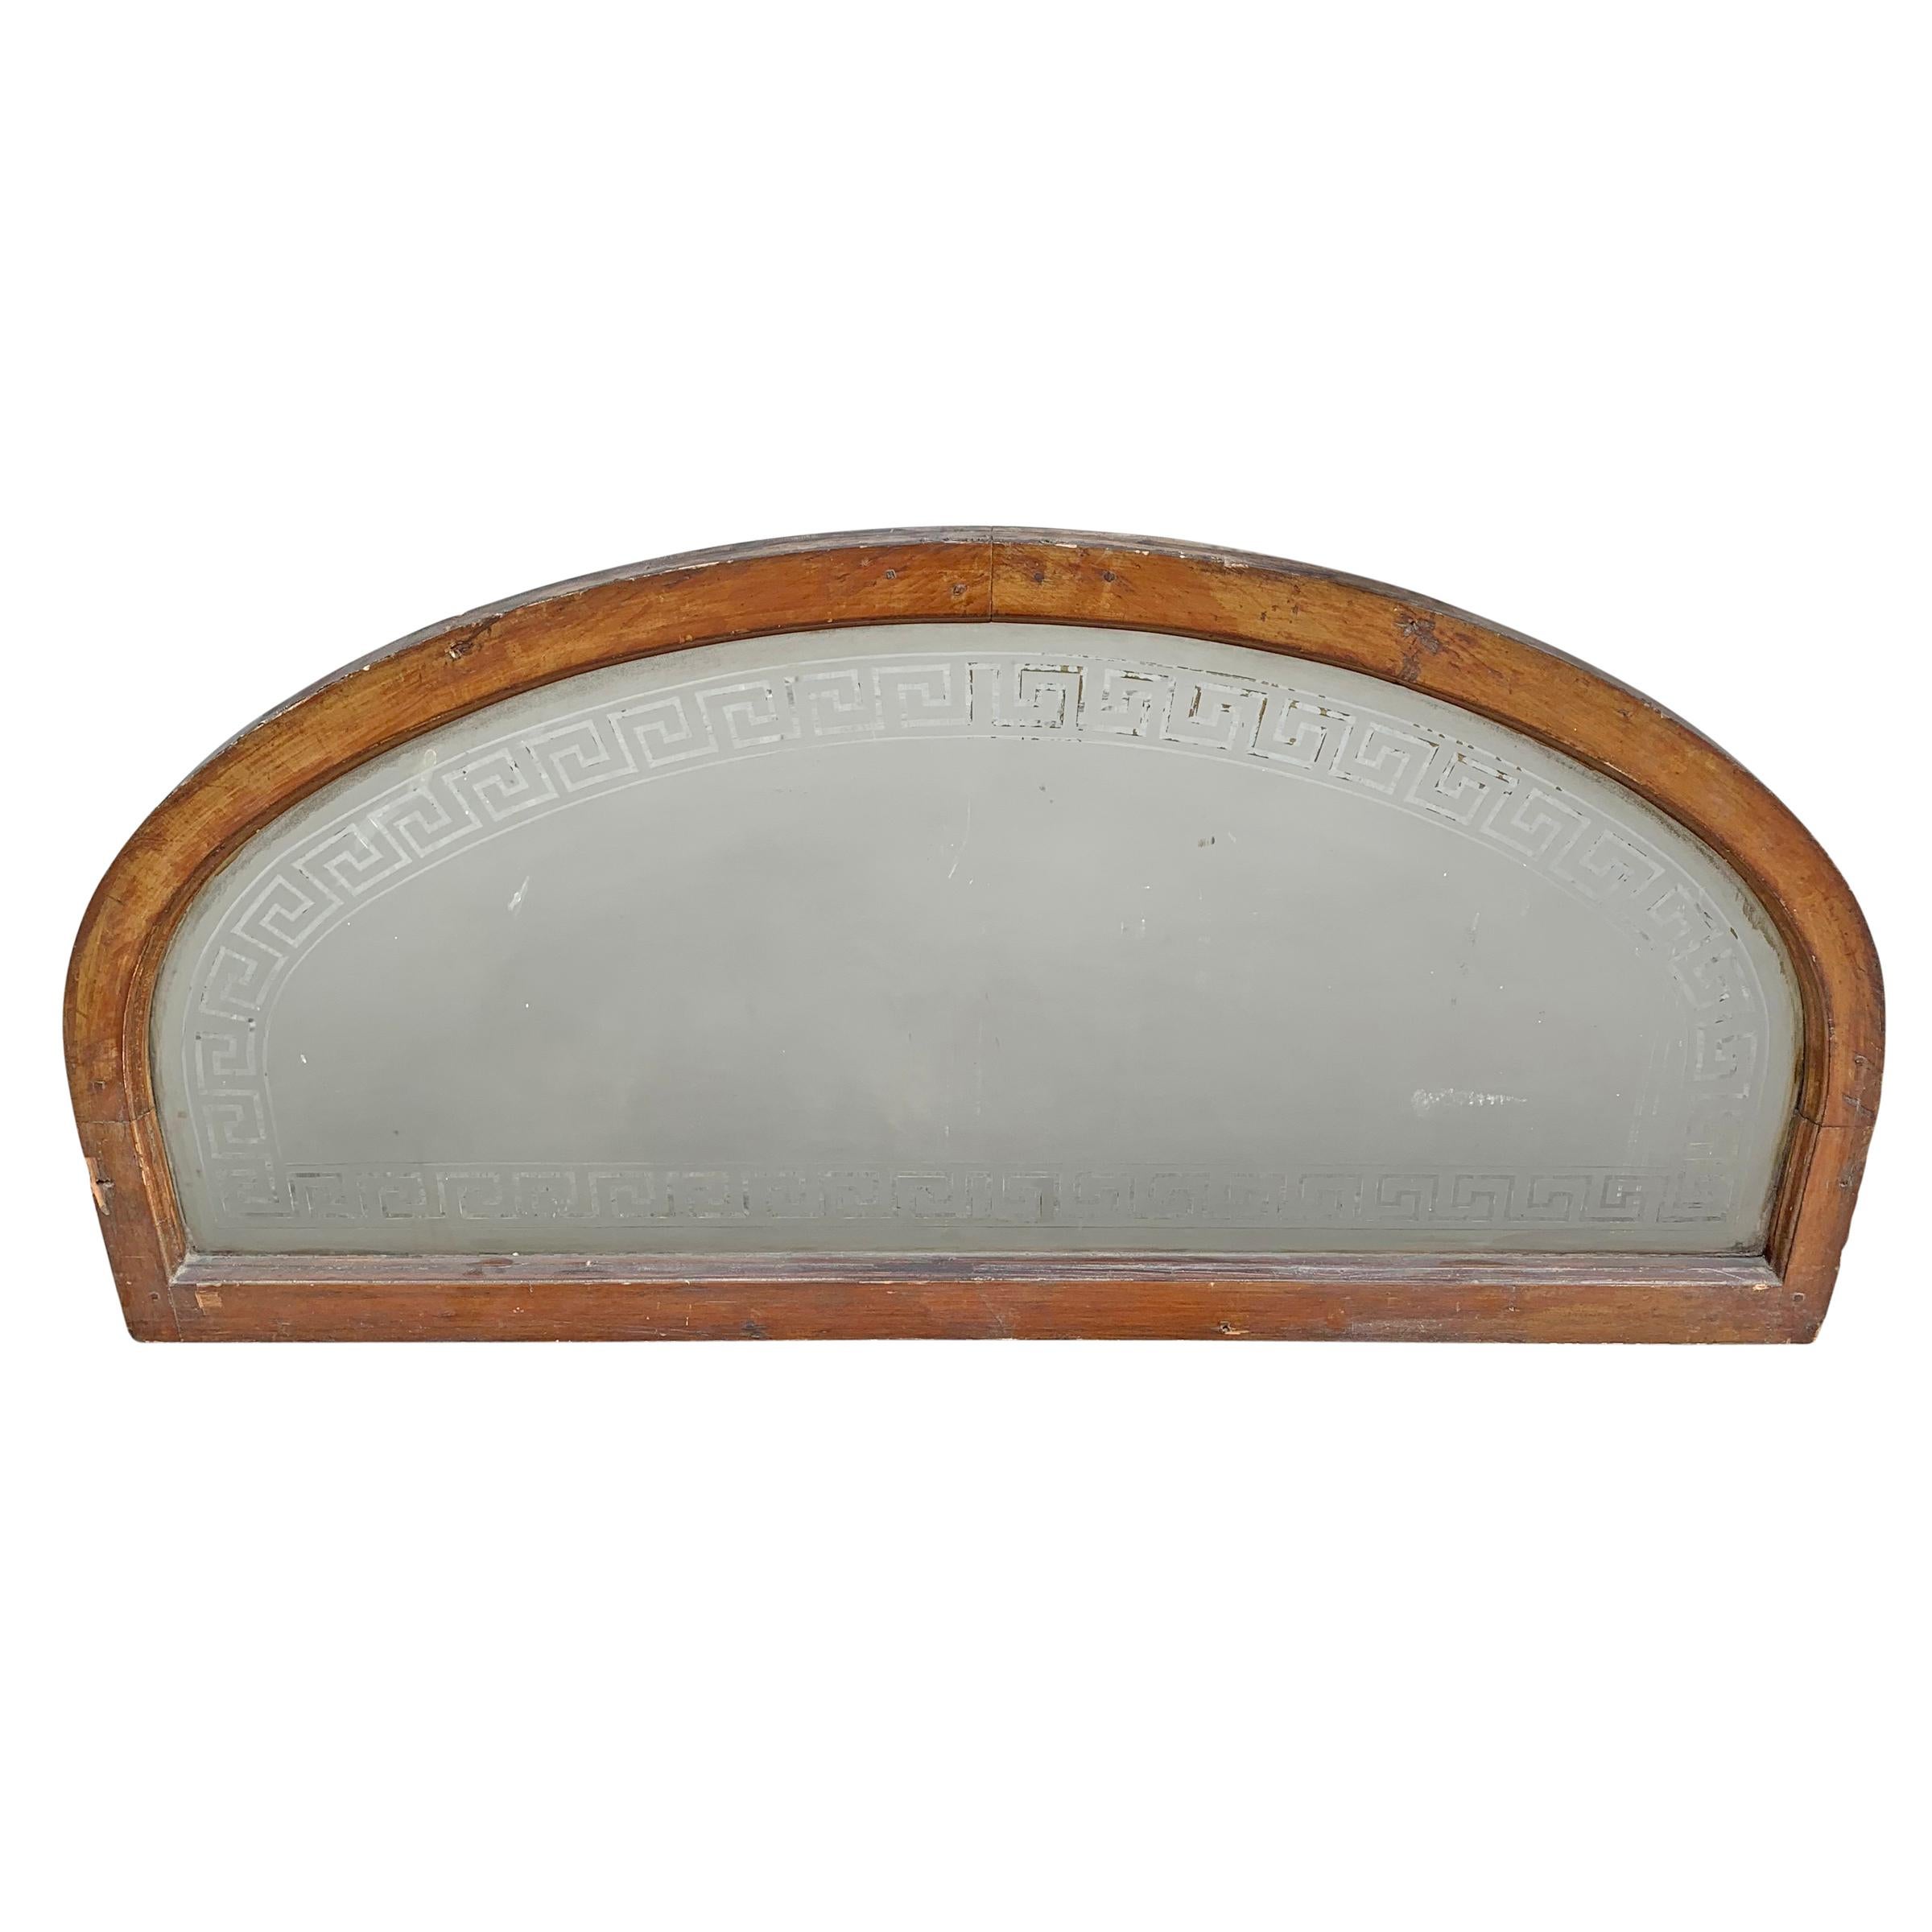 A marvellous late 19th century American arch top transom window with a hand-etched Greek key pattern framing a frosted central panel. It’s likely this was intended to be painted with the house number in the center, but it doesn’t appear to have even